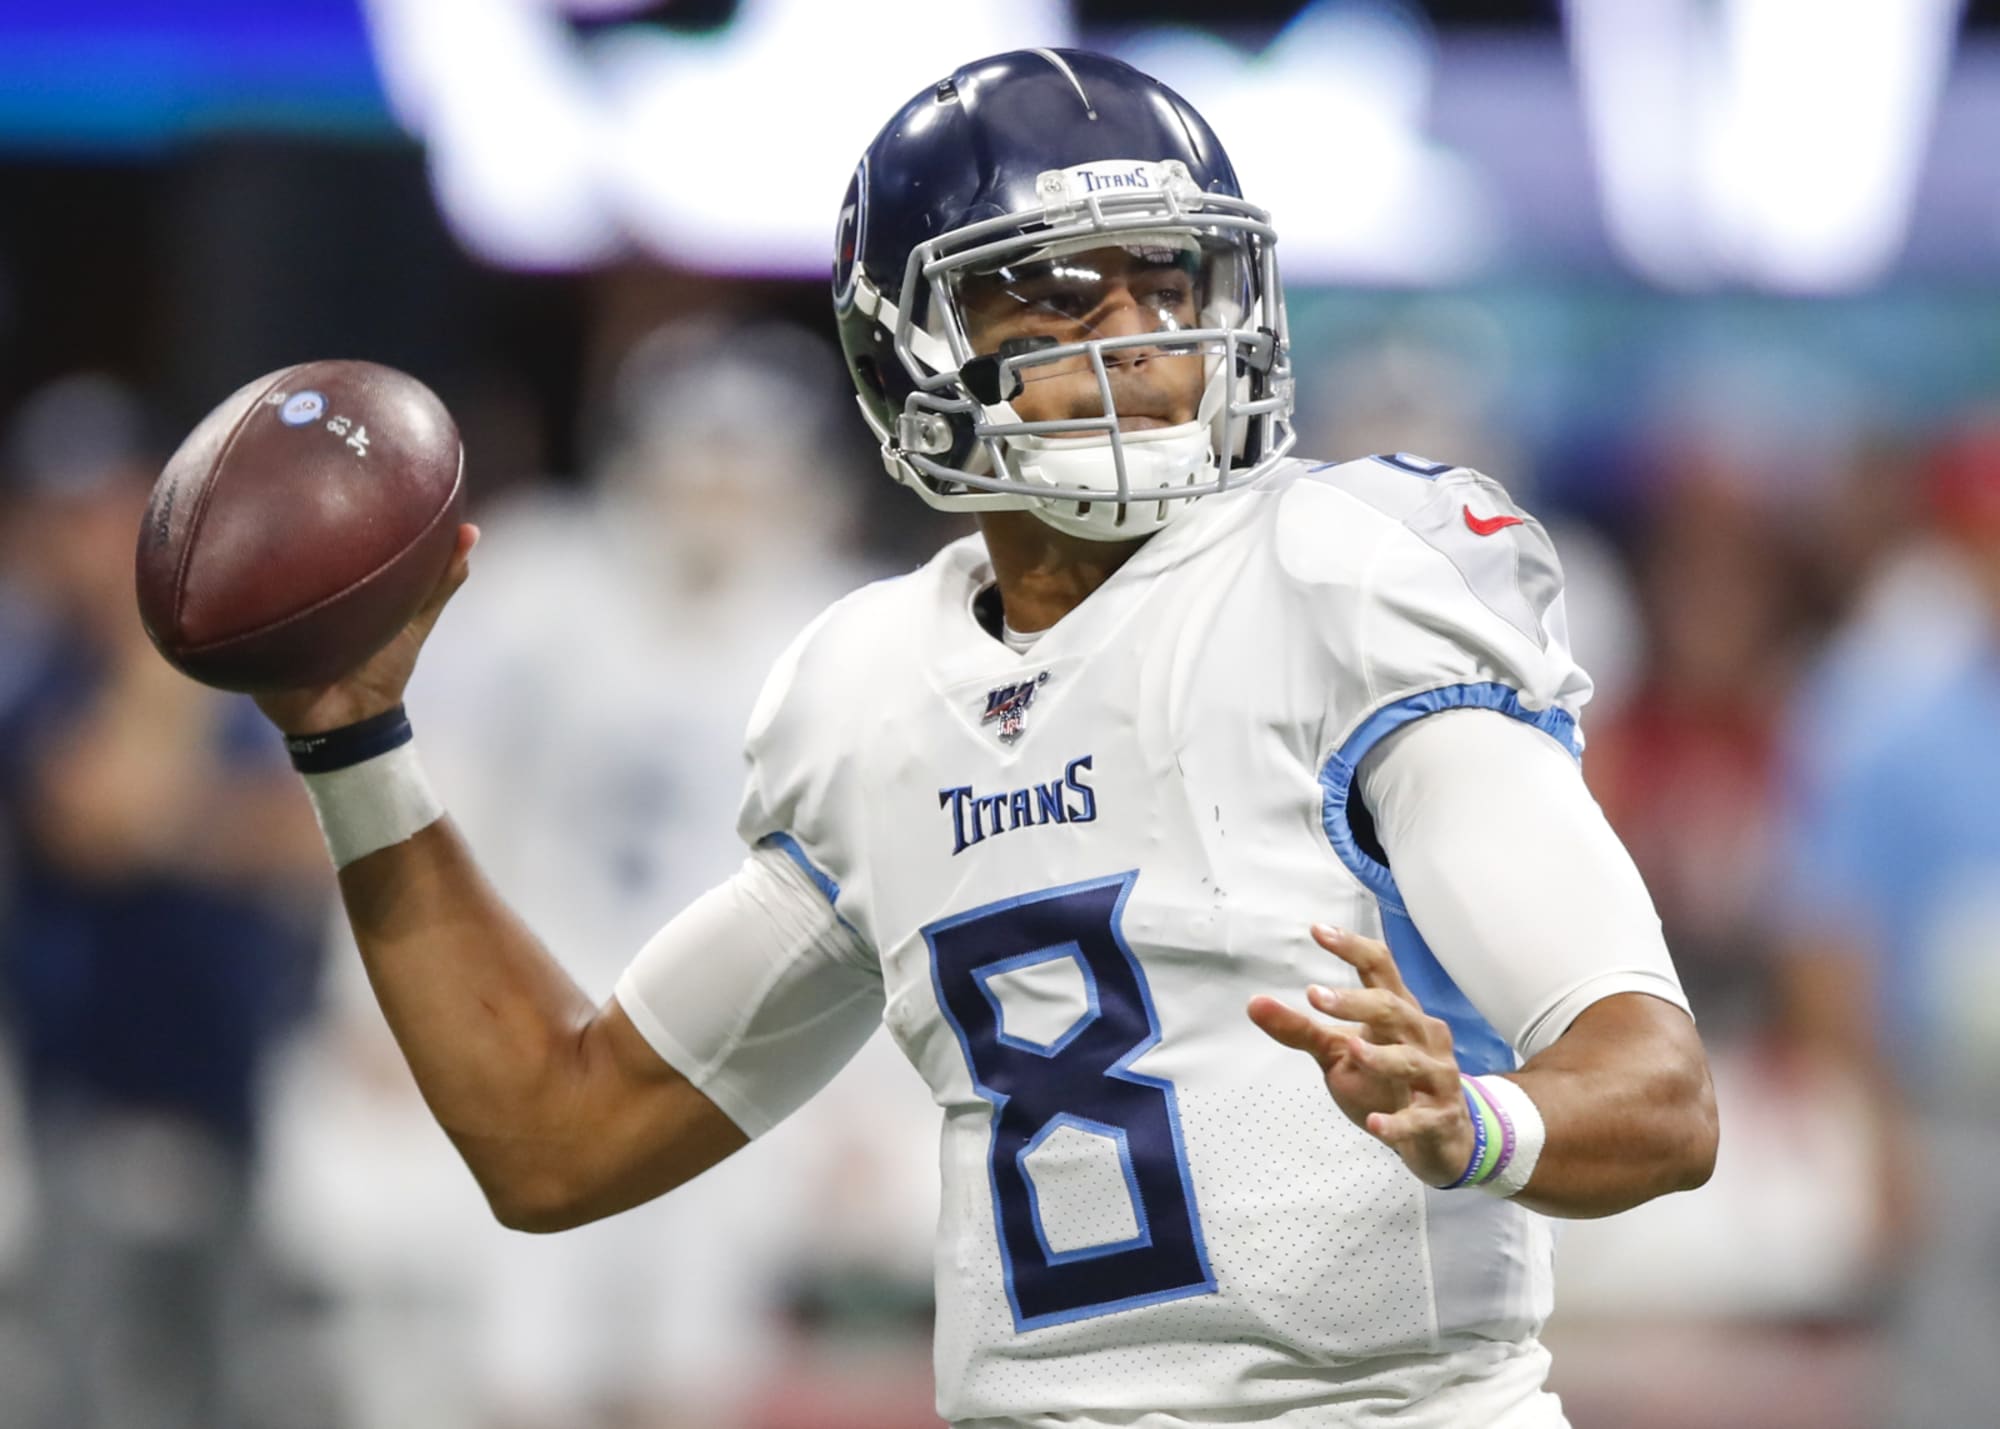 Marcus Mariota Throws For Three Touchdowns In Win Over Atlanta Falcons